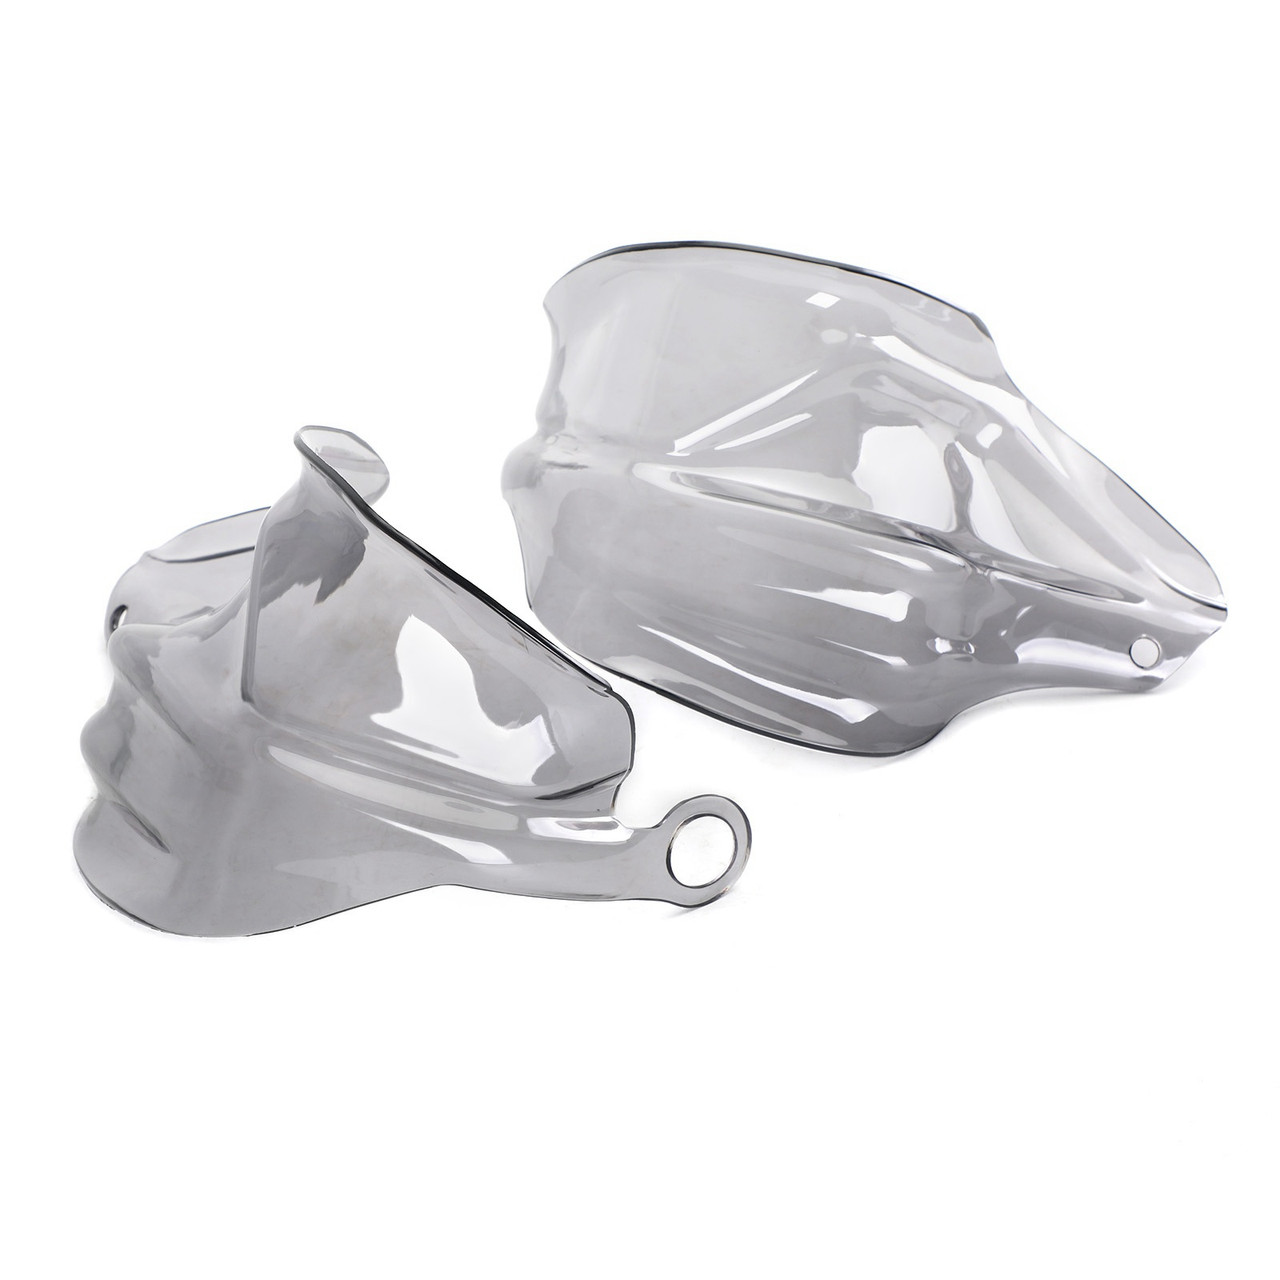 Motorcycle Protector Hand Guards Fits For BMW G310GS 17-21 BMW G310R 17-21 Gray